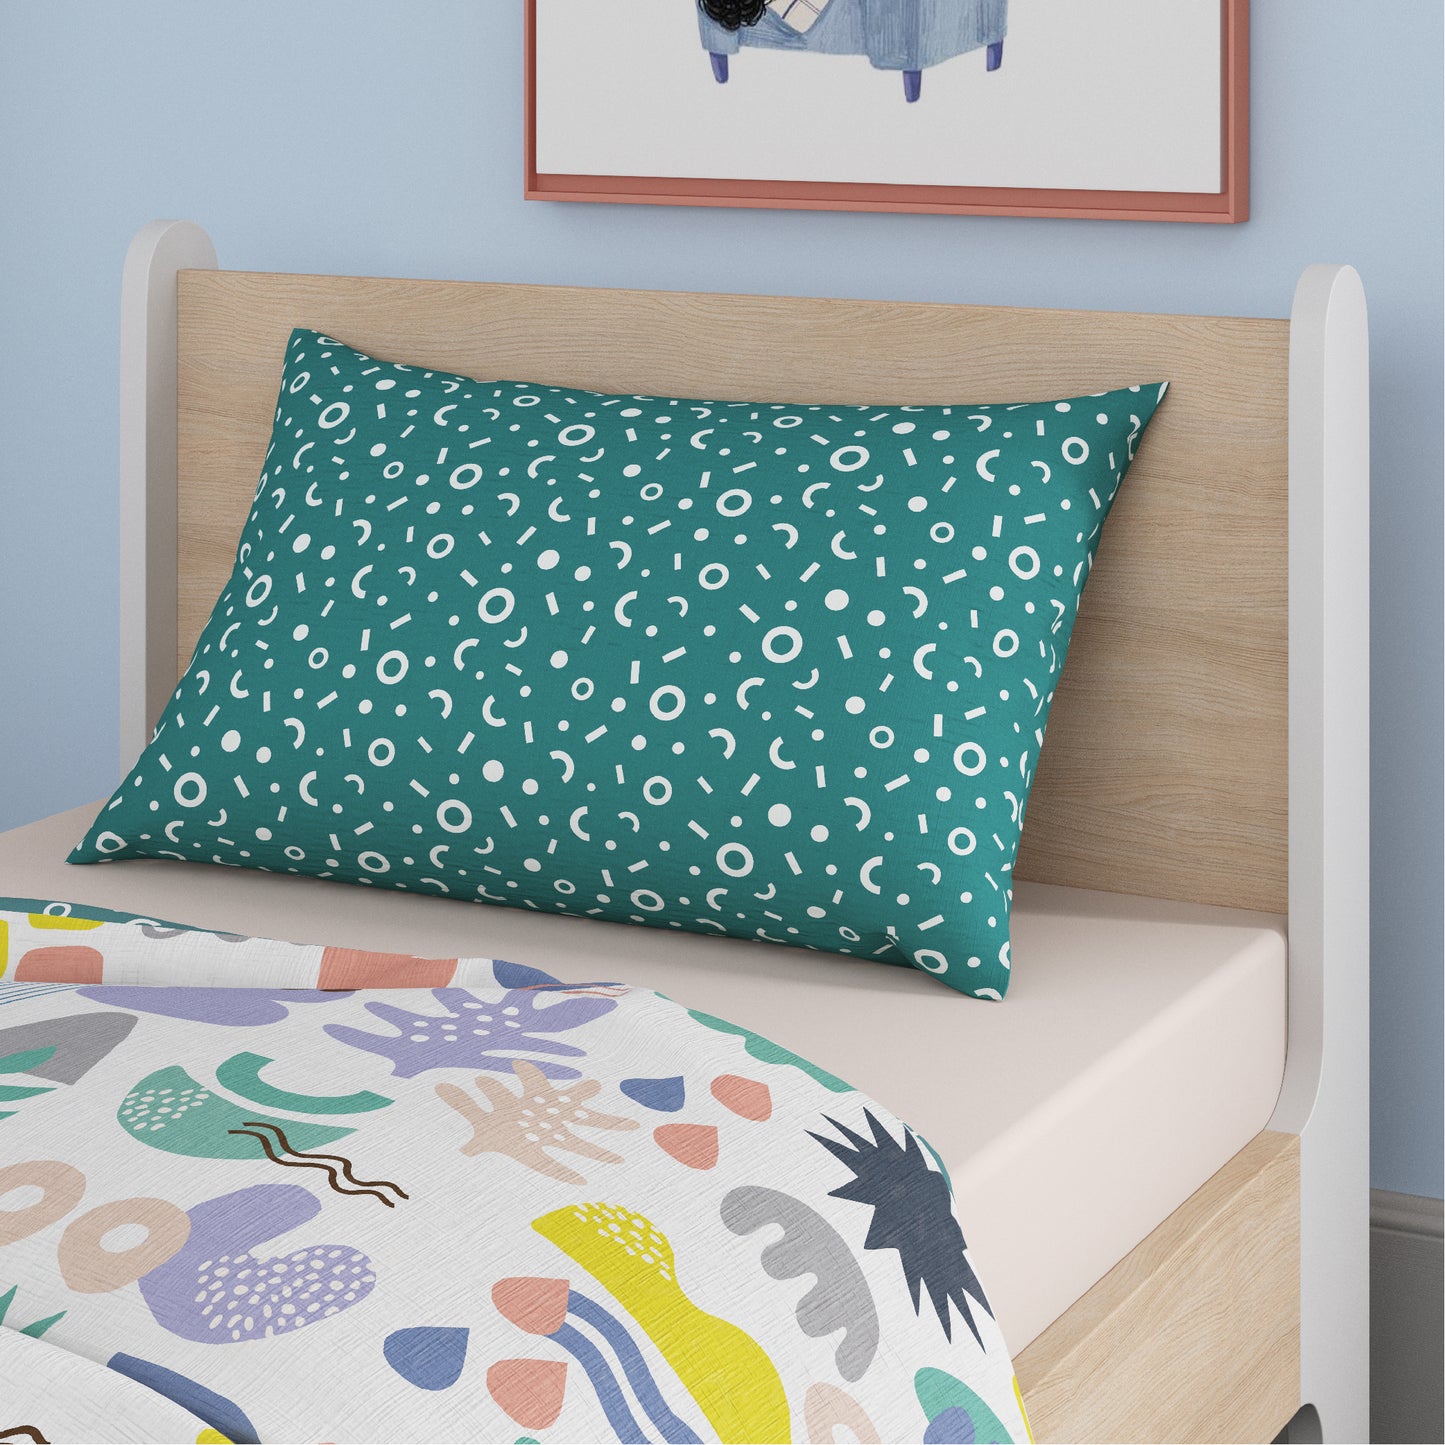 Oodles of Doodles Reversible AC Comforter Single Bed Size